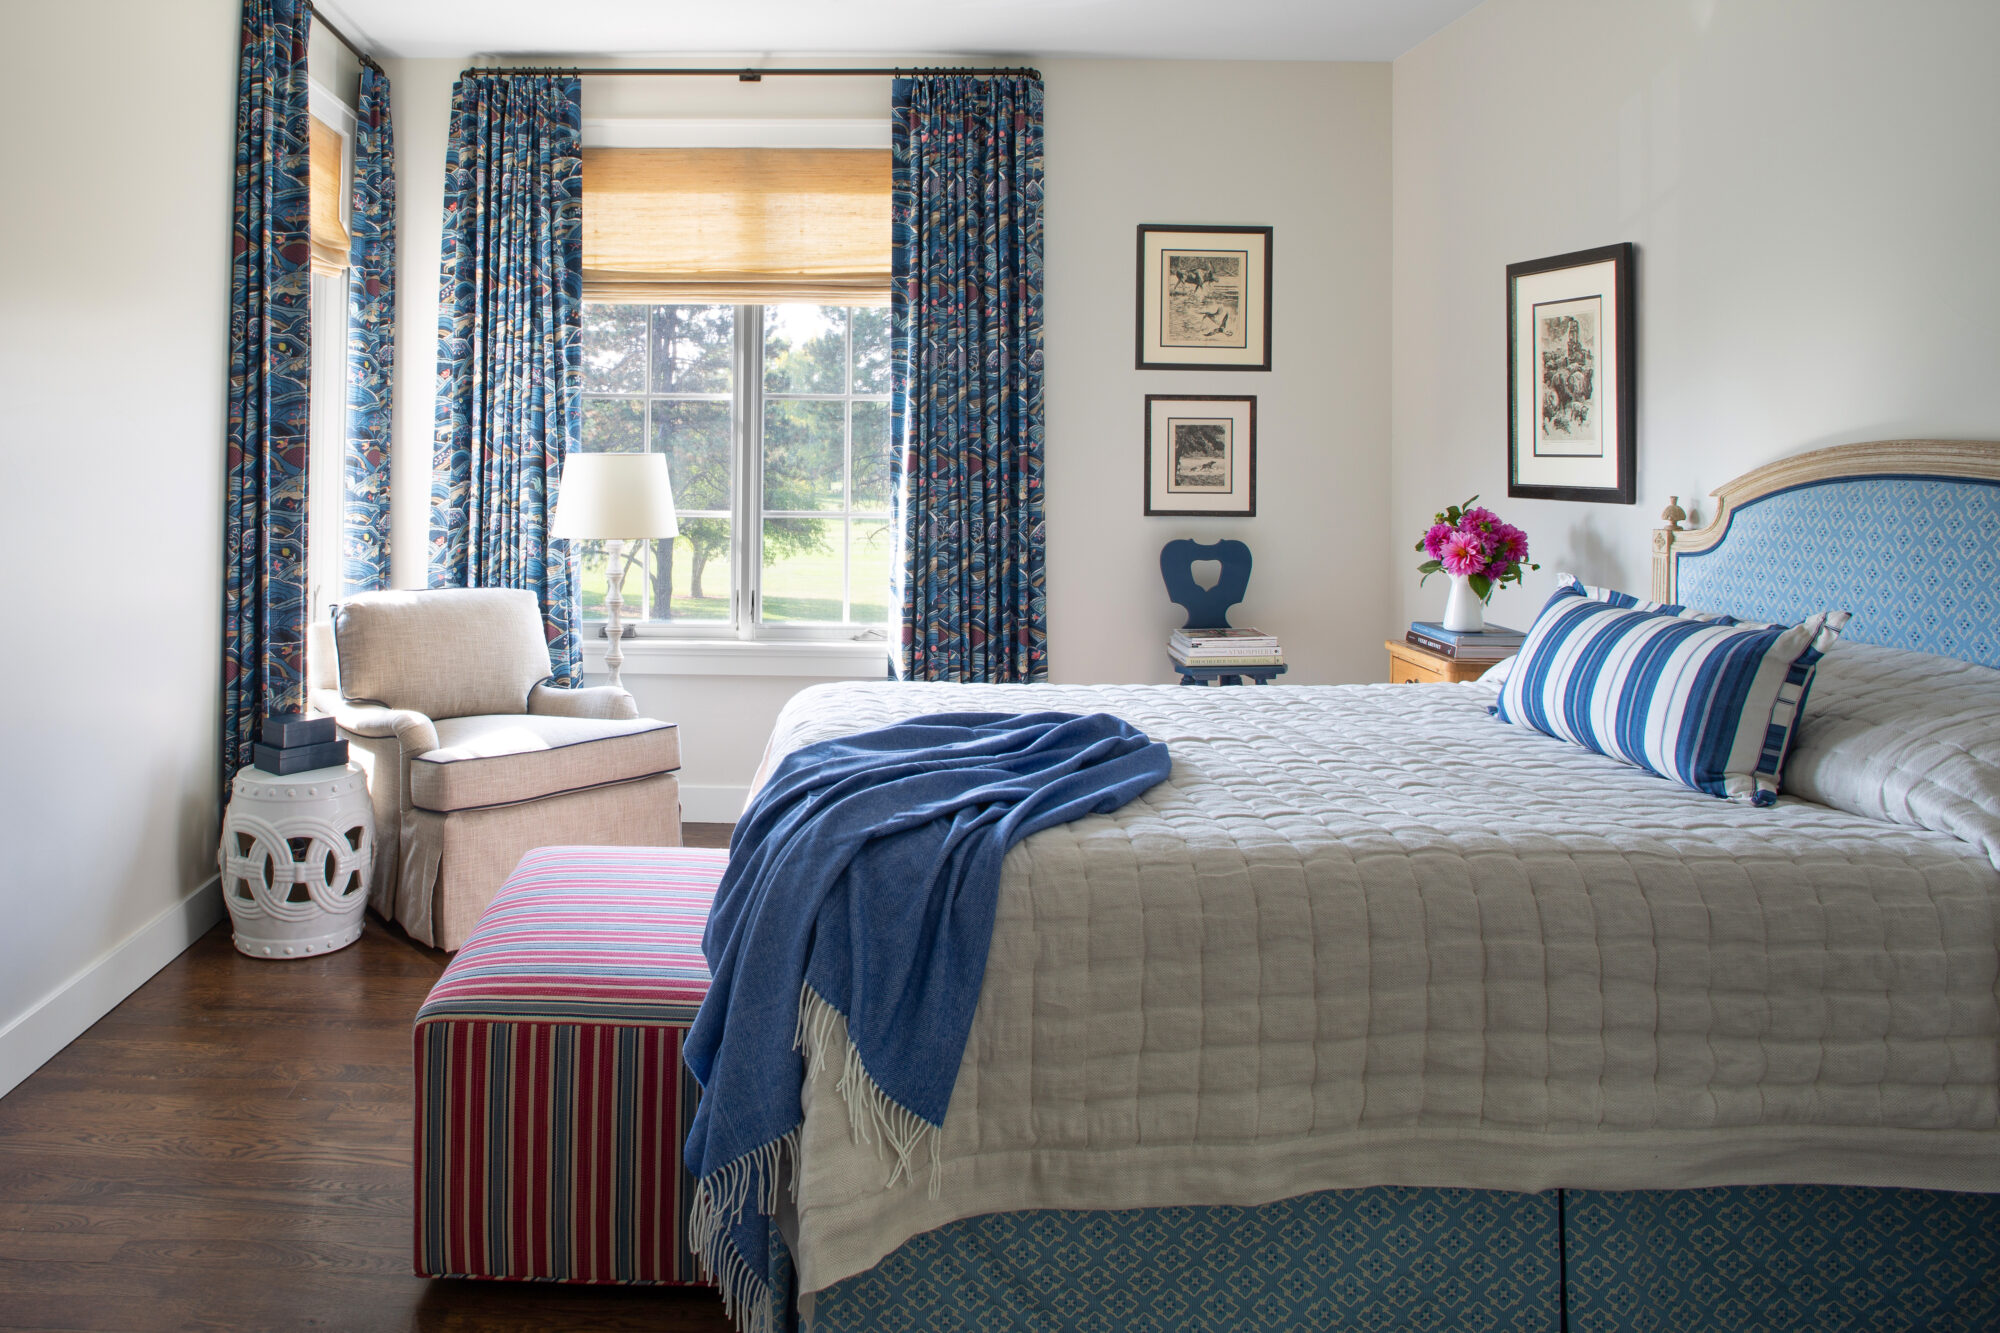 A guest bedroom has a pale blue, berry red and white color palette.